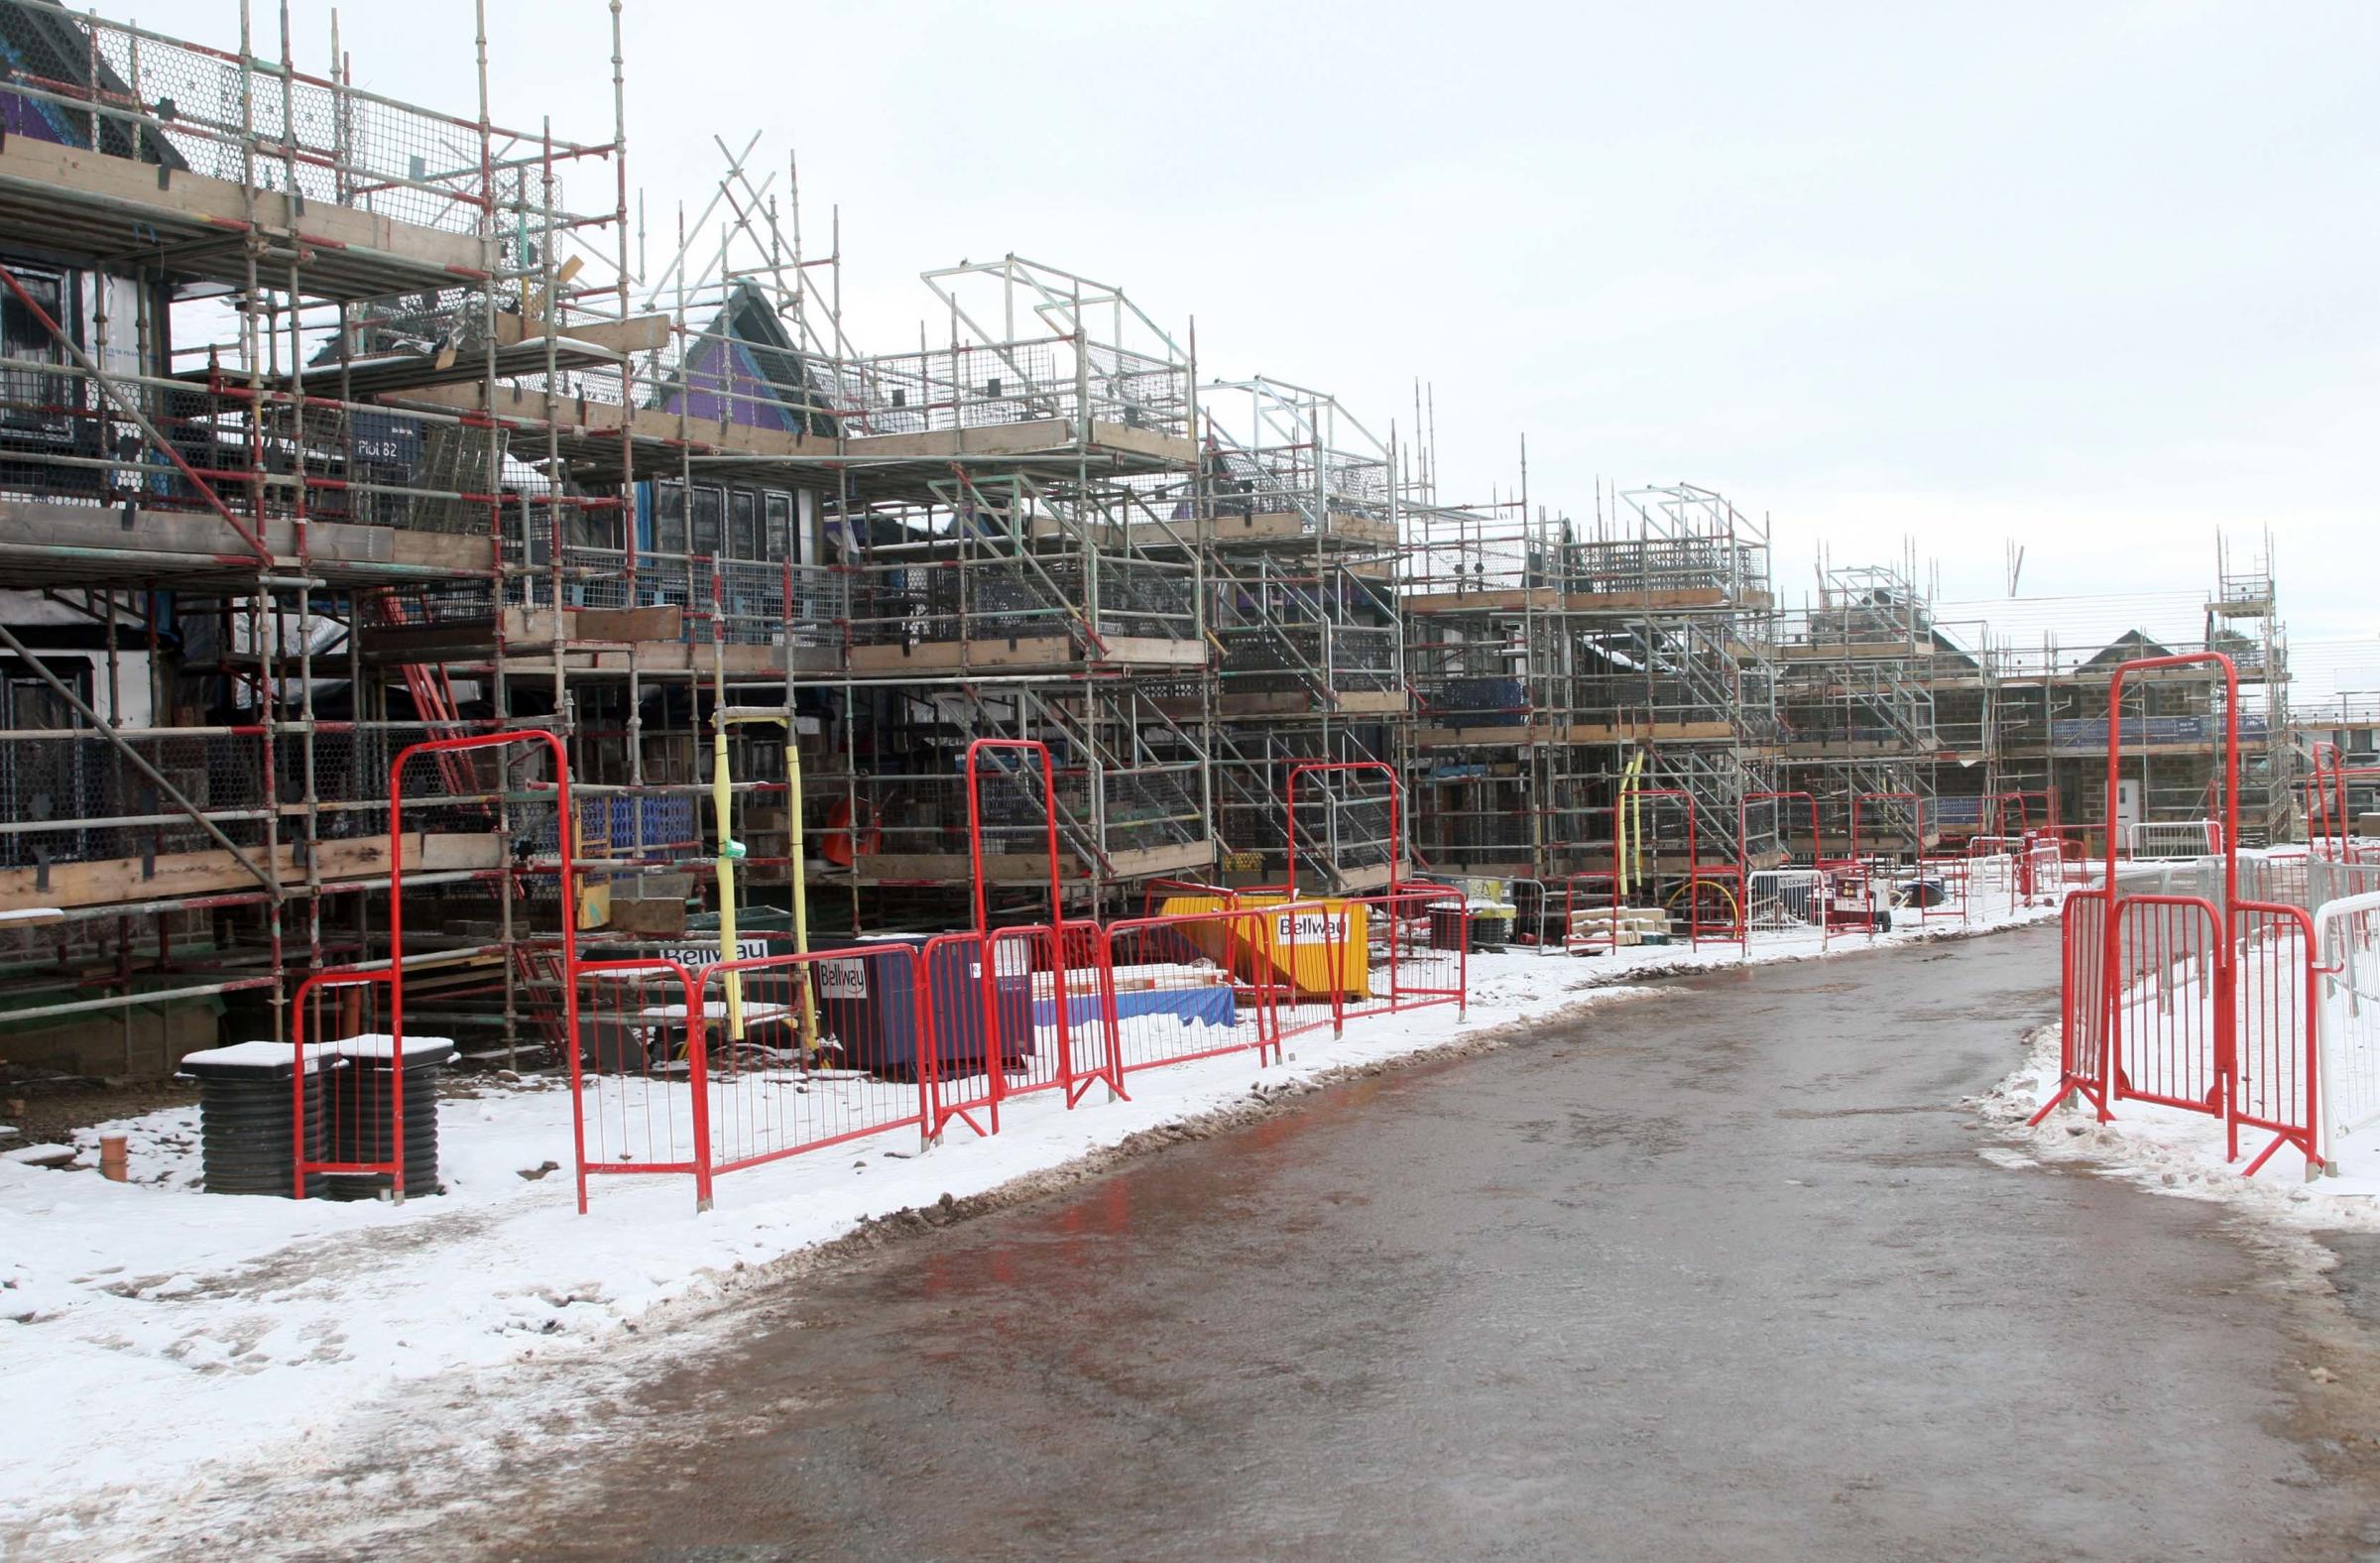 Dozens of new homes are being built as part of a development on the western edge of Elphinstone